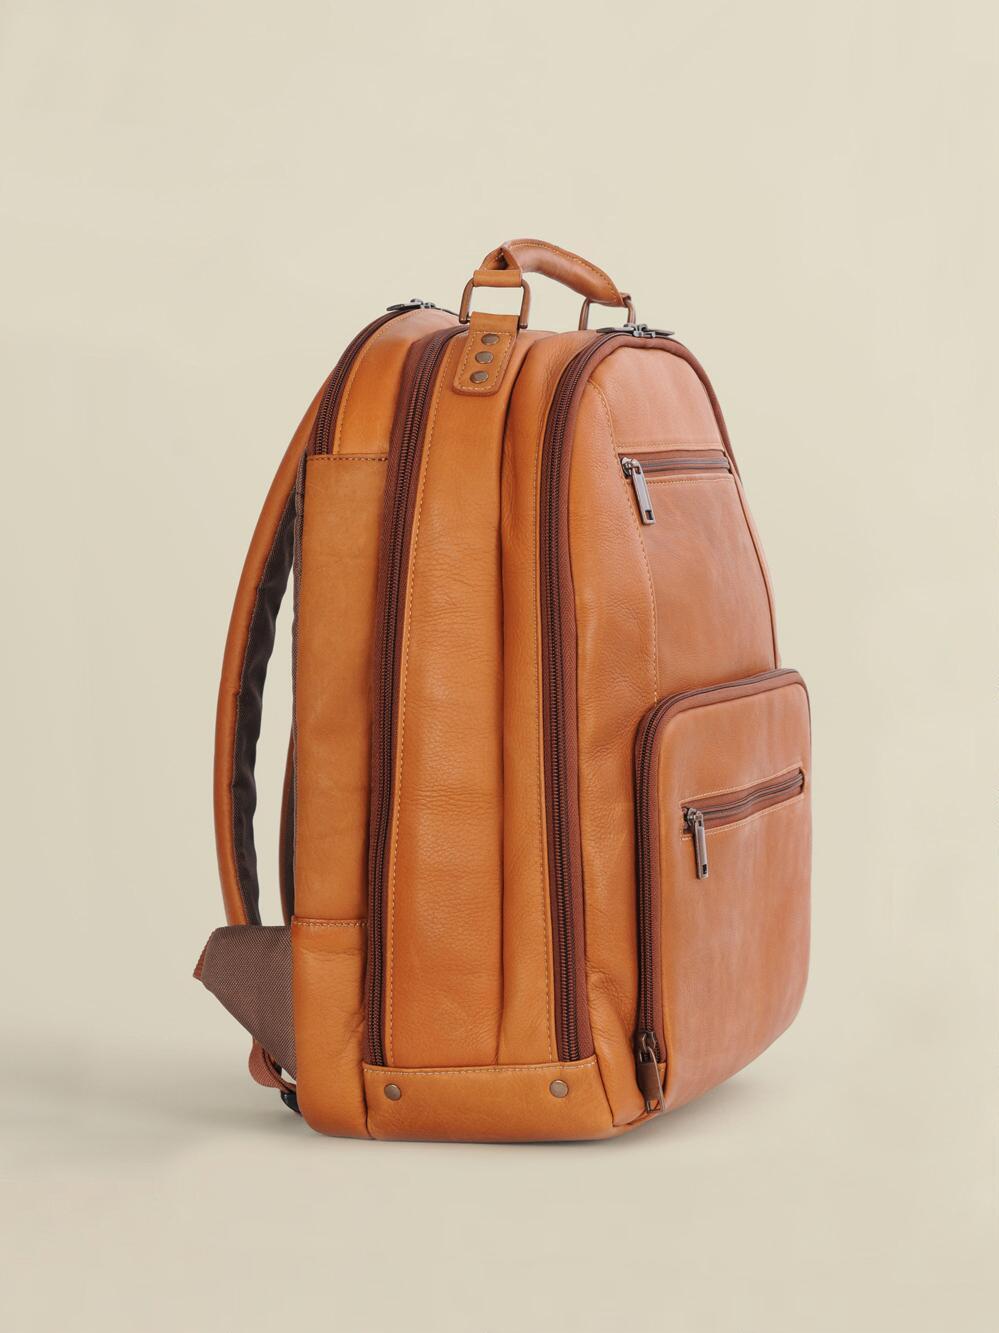 Wilsons Leather Steve Leather Laptop Backpack in Cognac (Brown) for Men -  Lyst